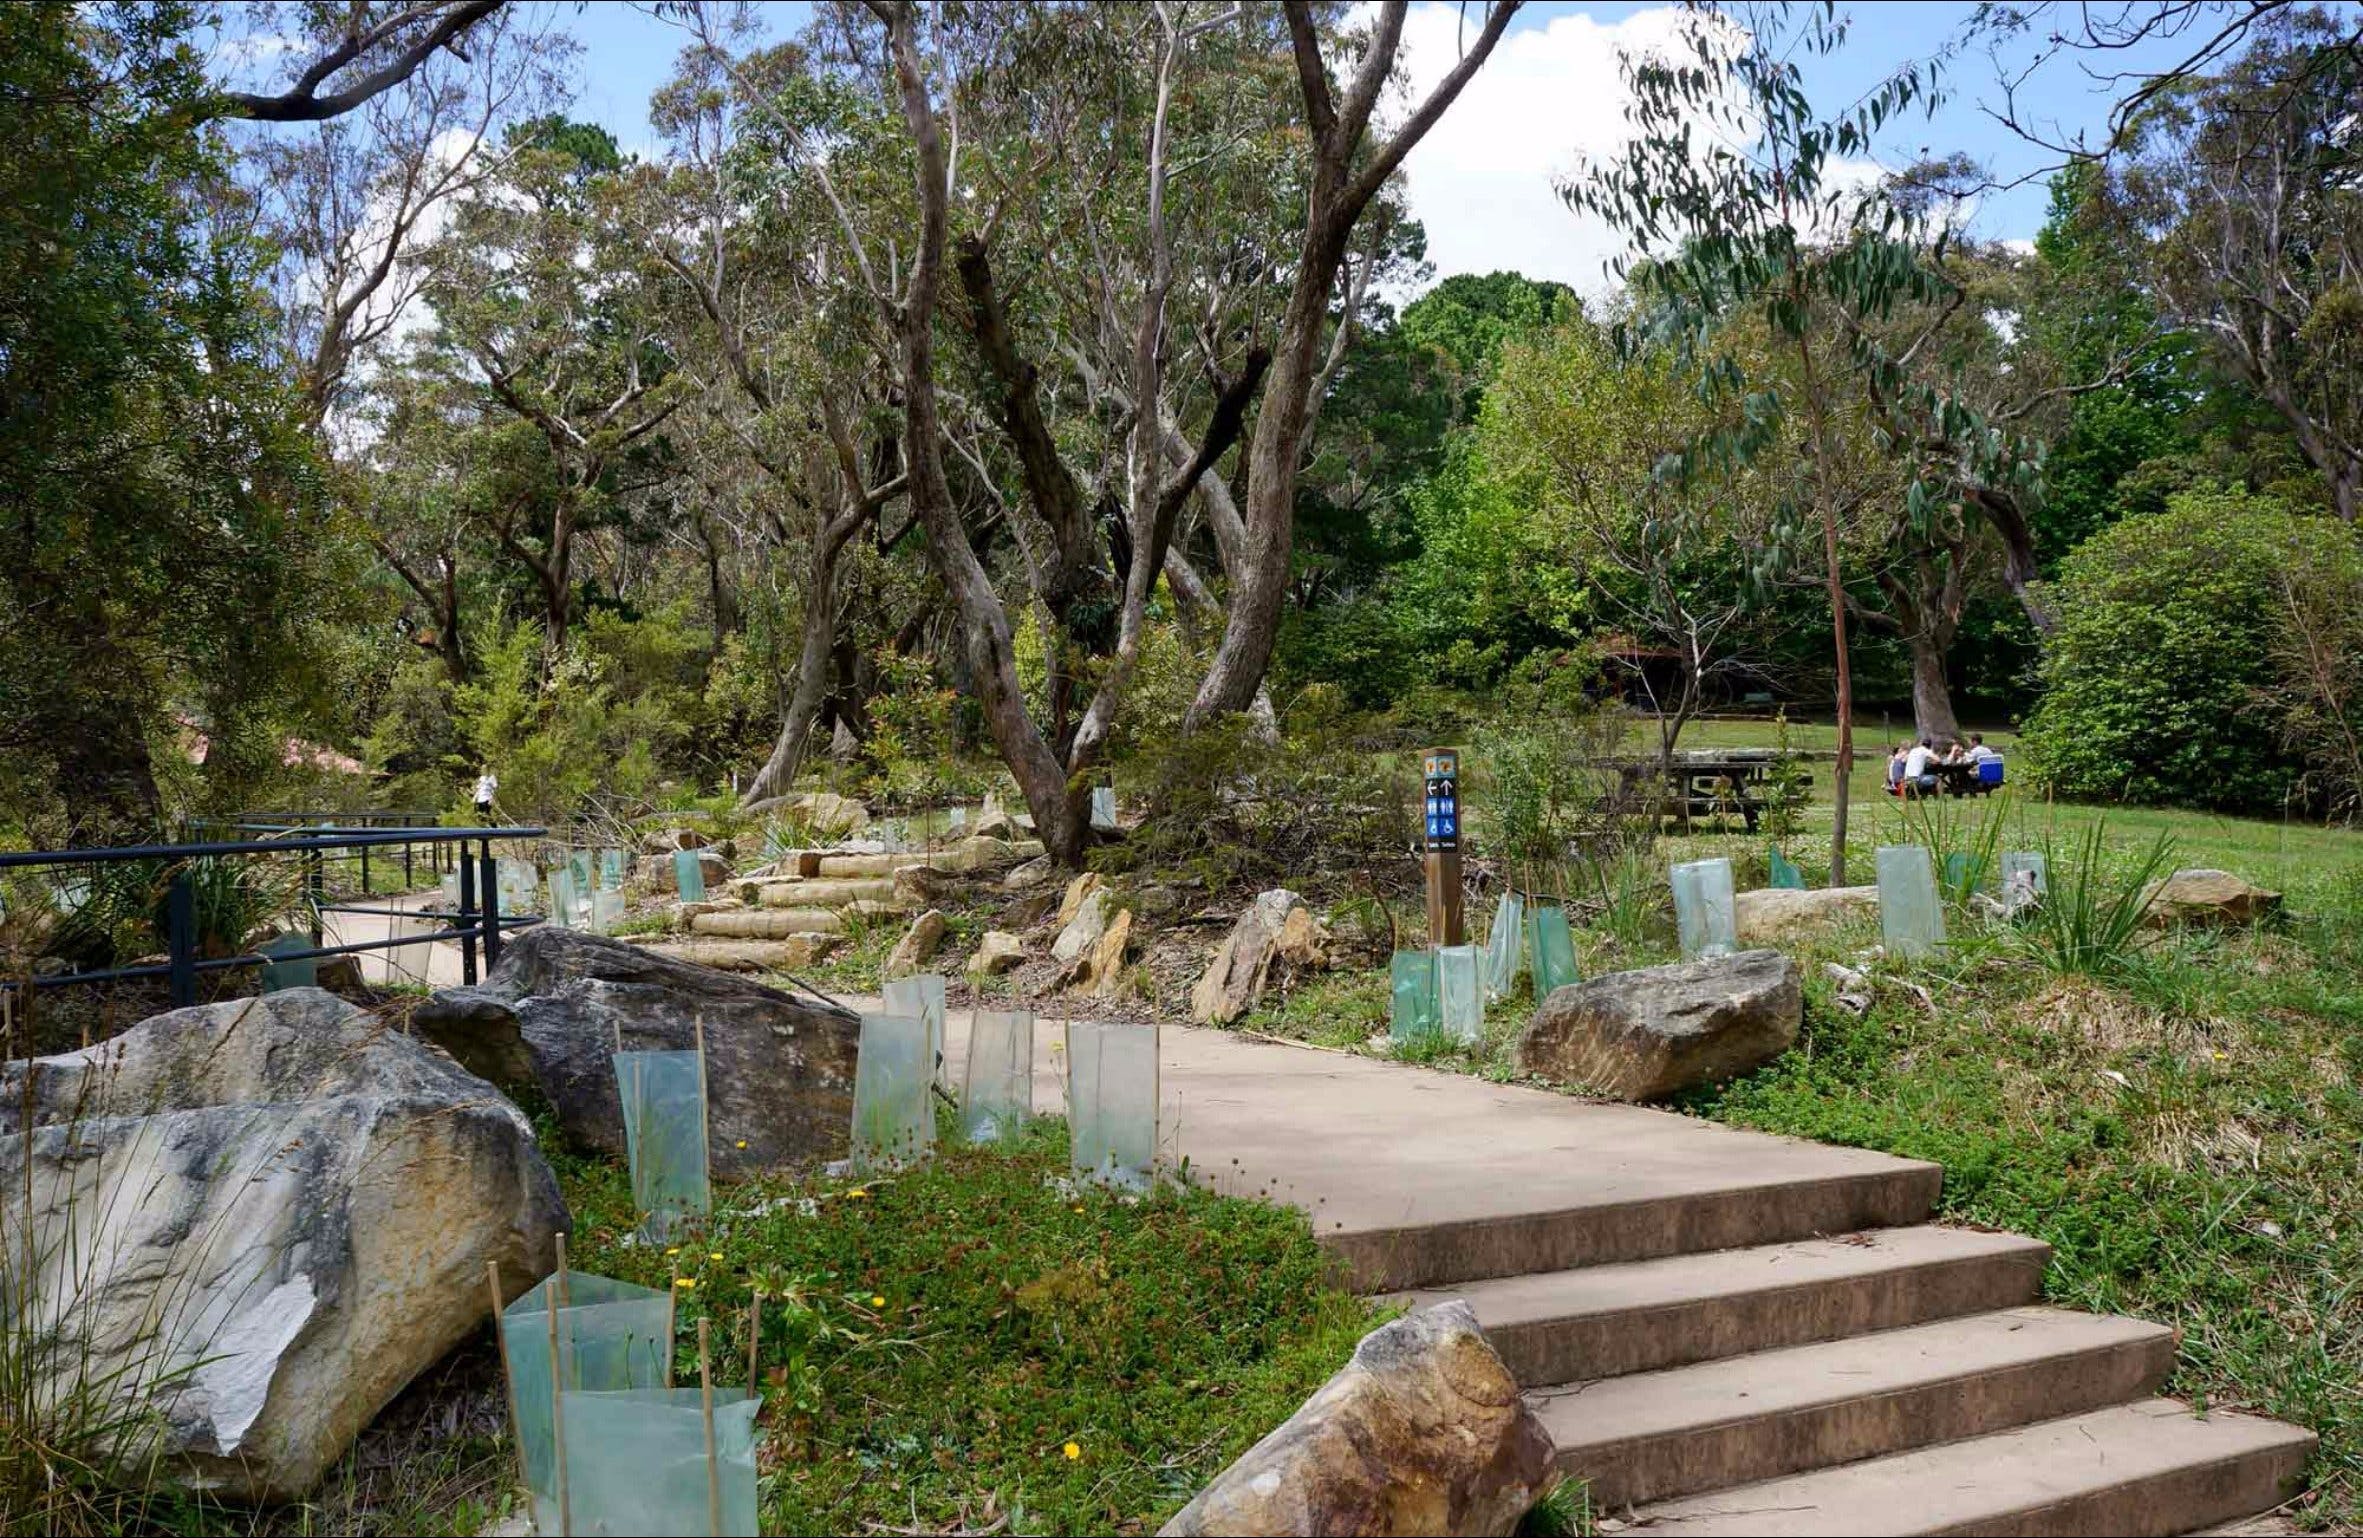 Wentworth Falls picnic area - Attractions